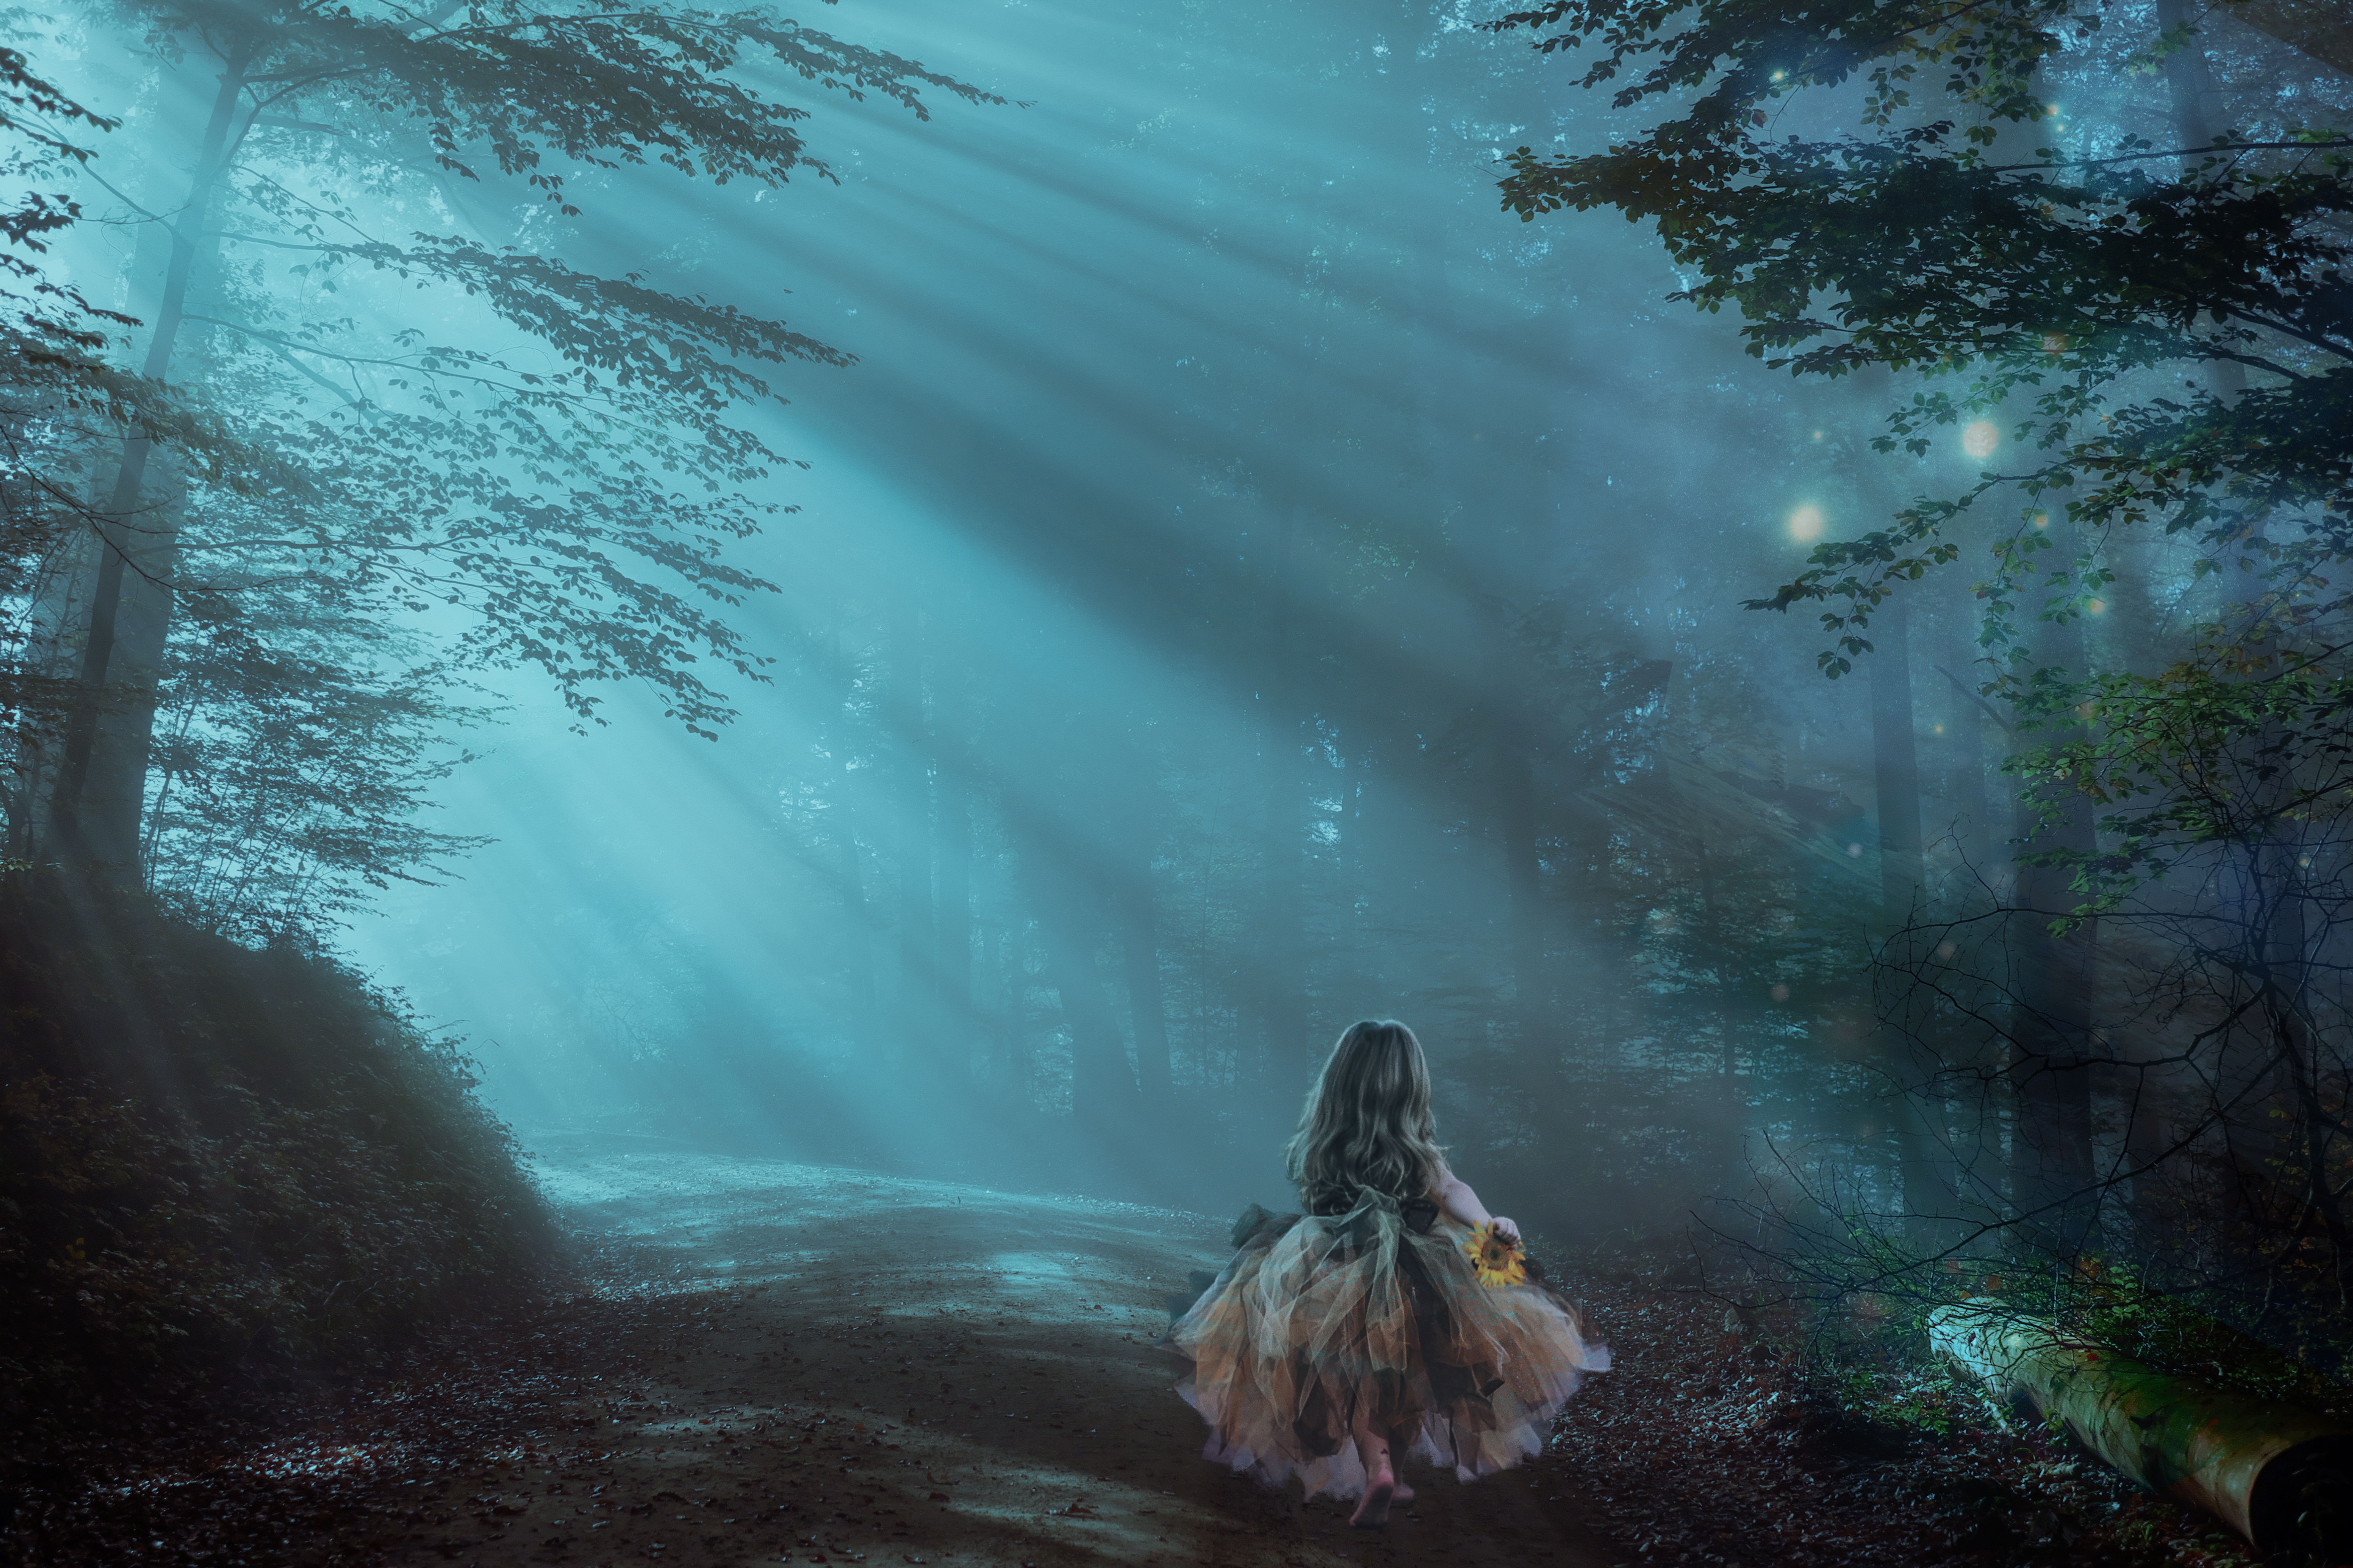 Little Girl alone at Night in Misty Forest